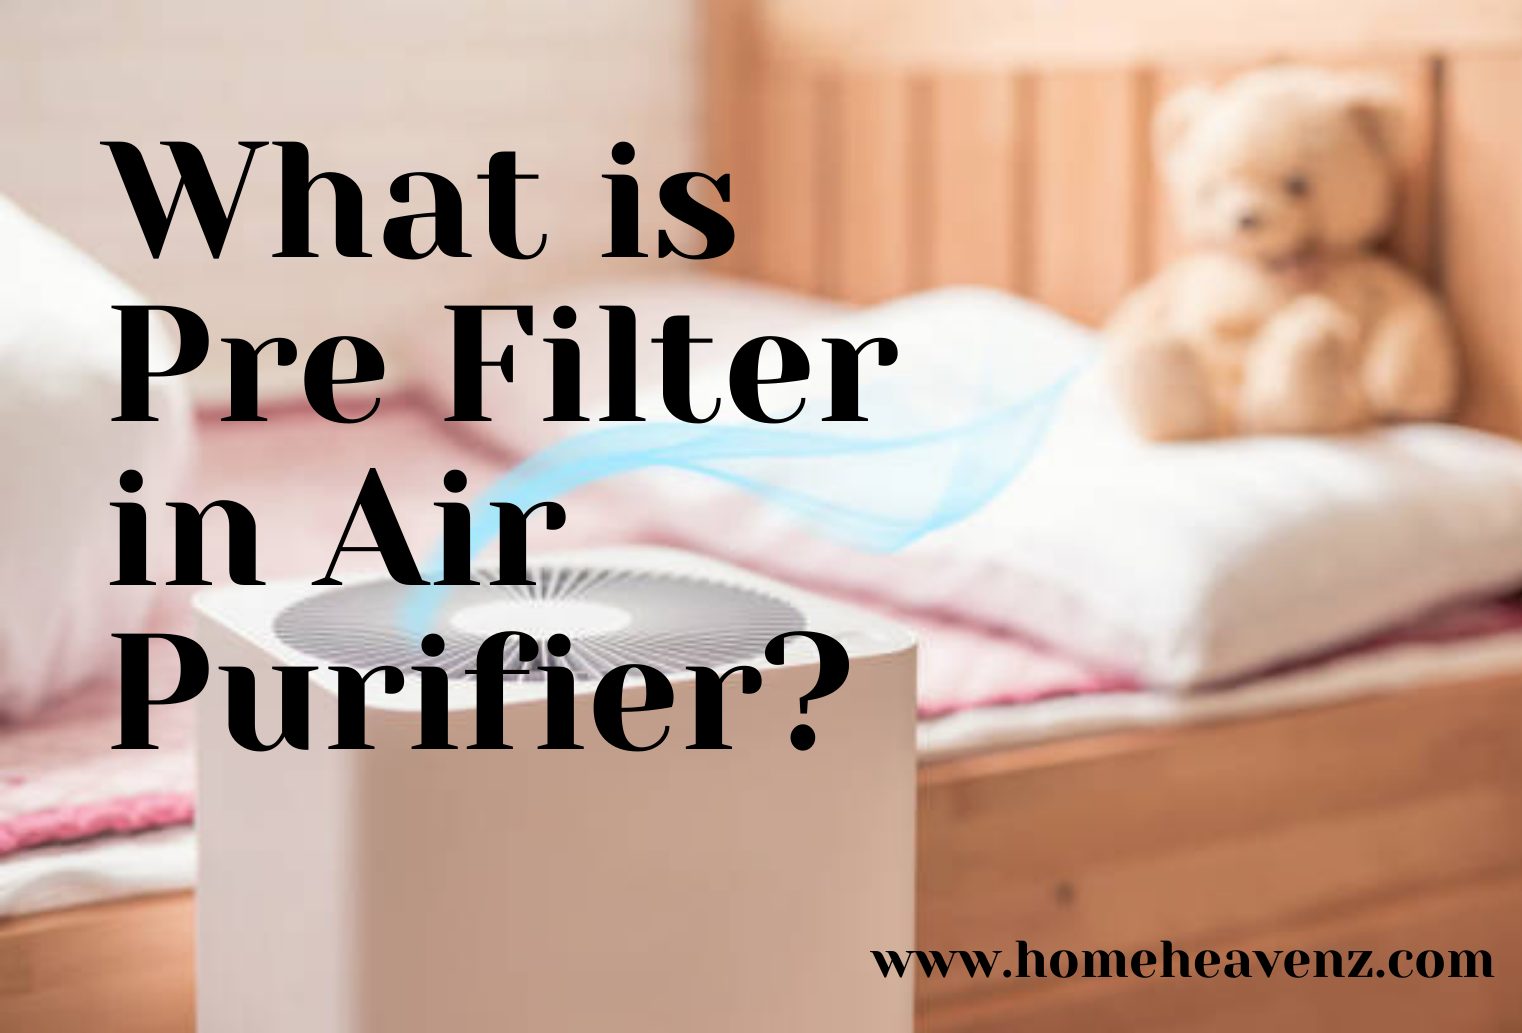 What is Pre Filter in Air Purifier